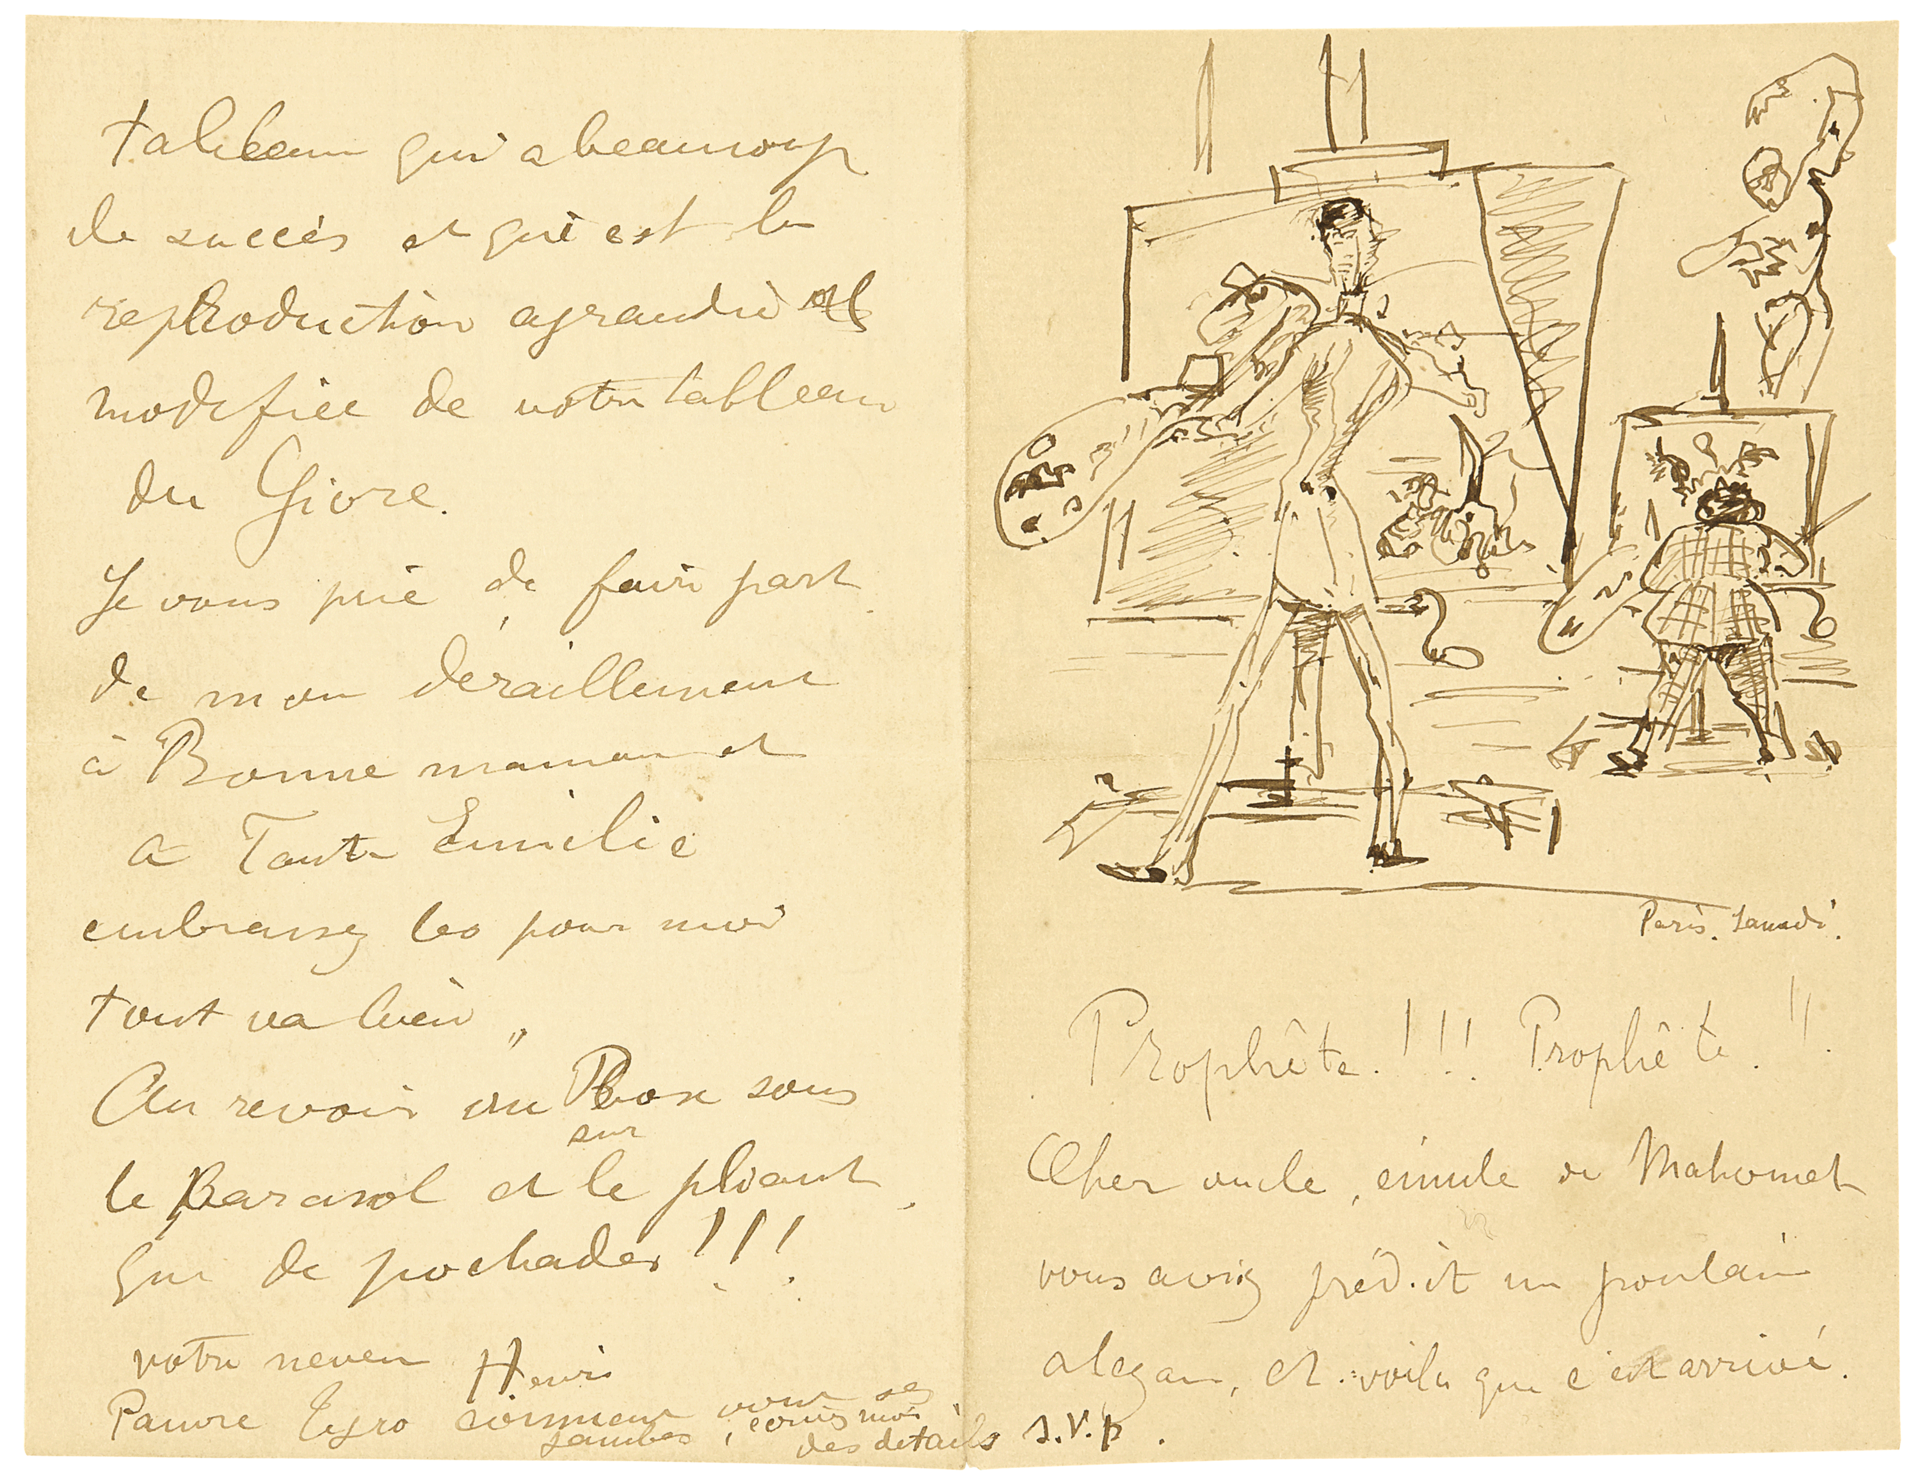 At left and bottom right is handwritten text in French. At top right is a sketch of a tall artist and a short artist painting at easels.